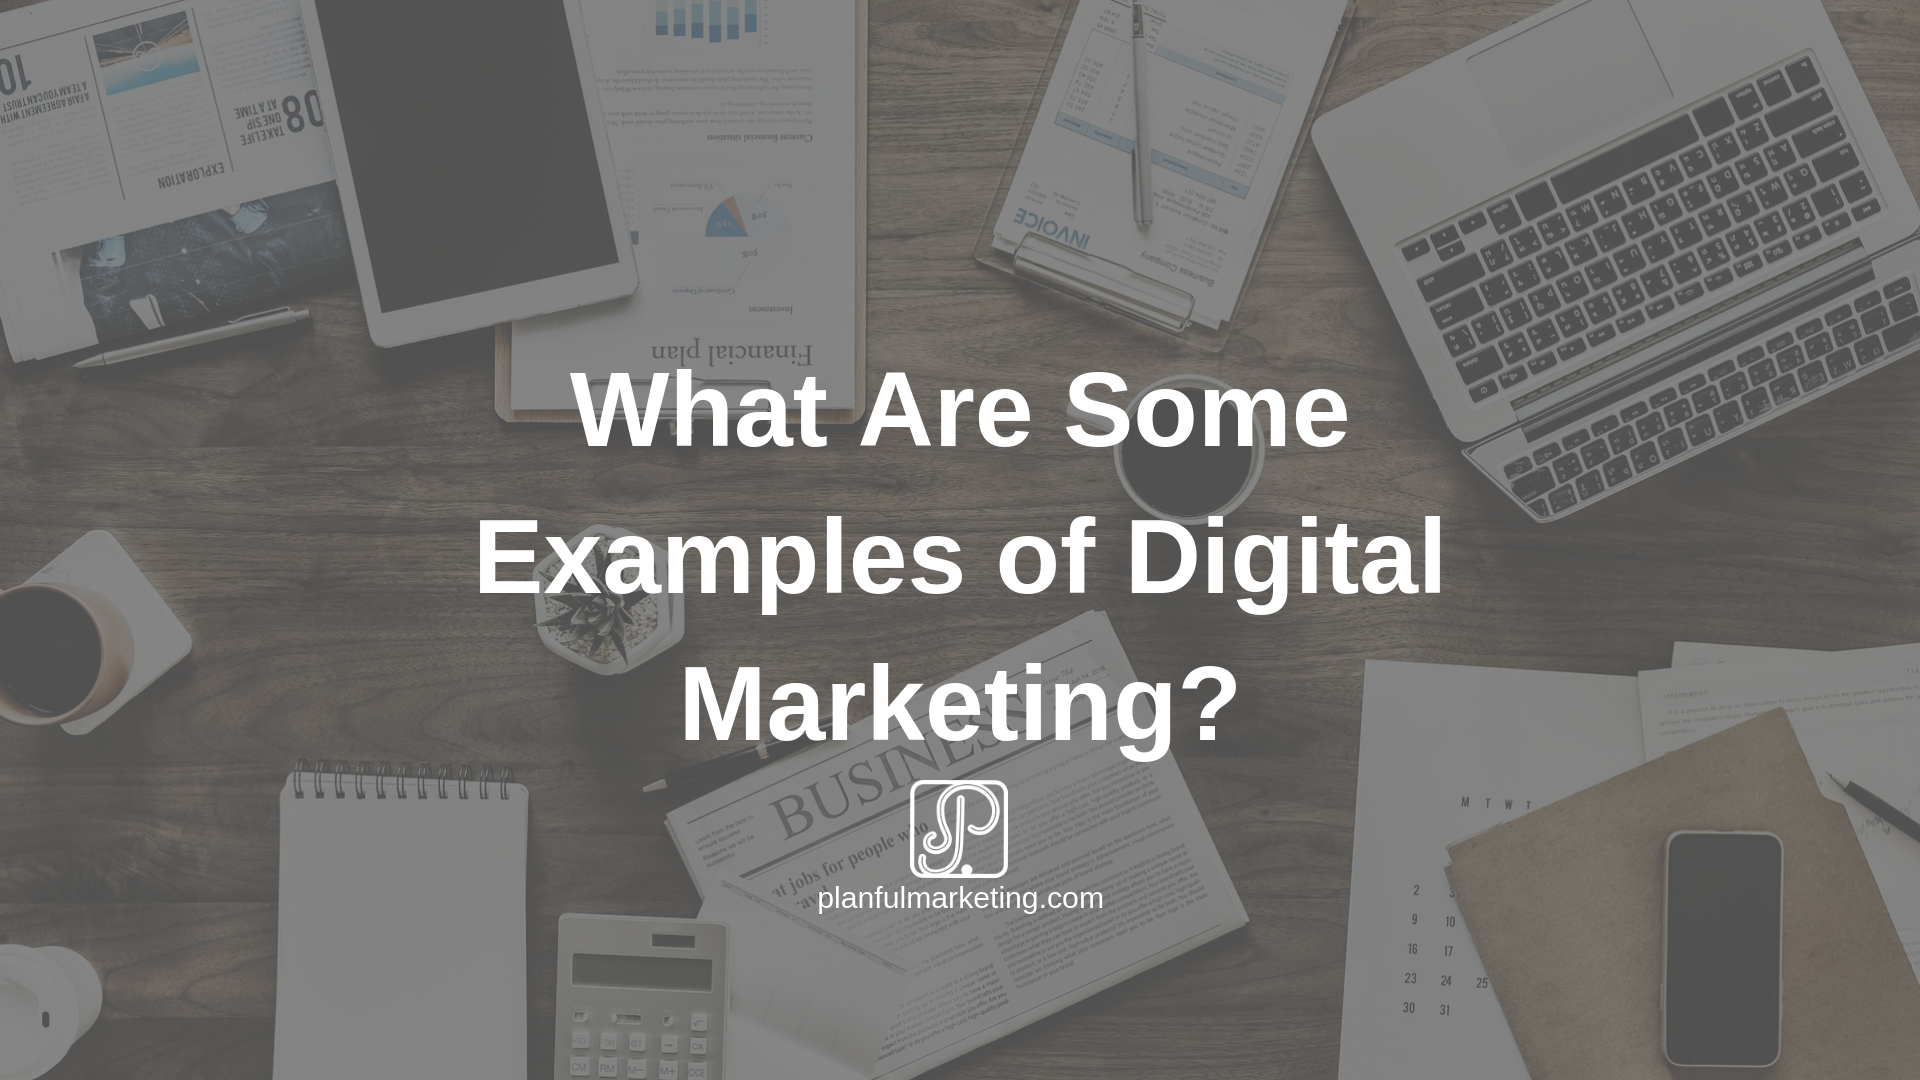 What Are Some Examples of Digital Marketing?